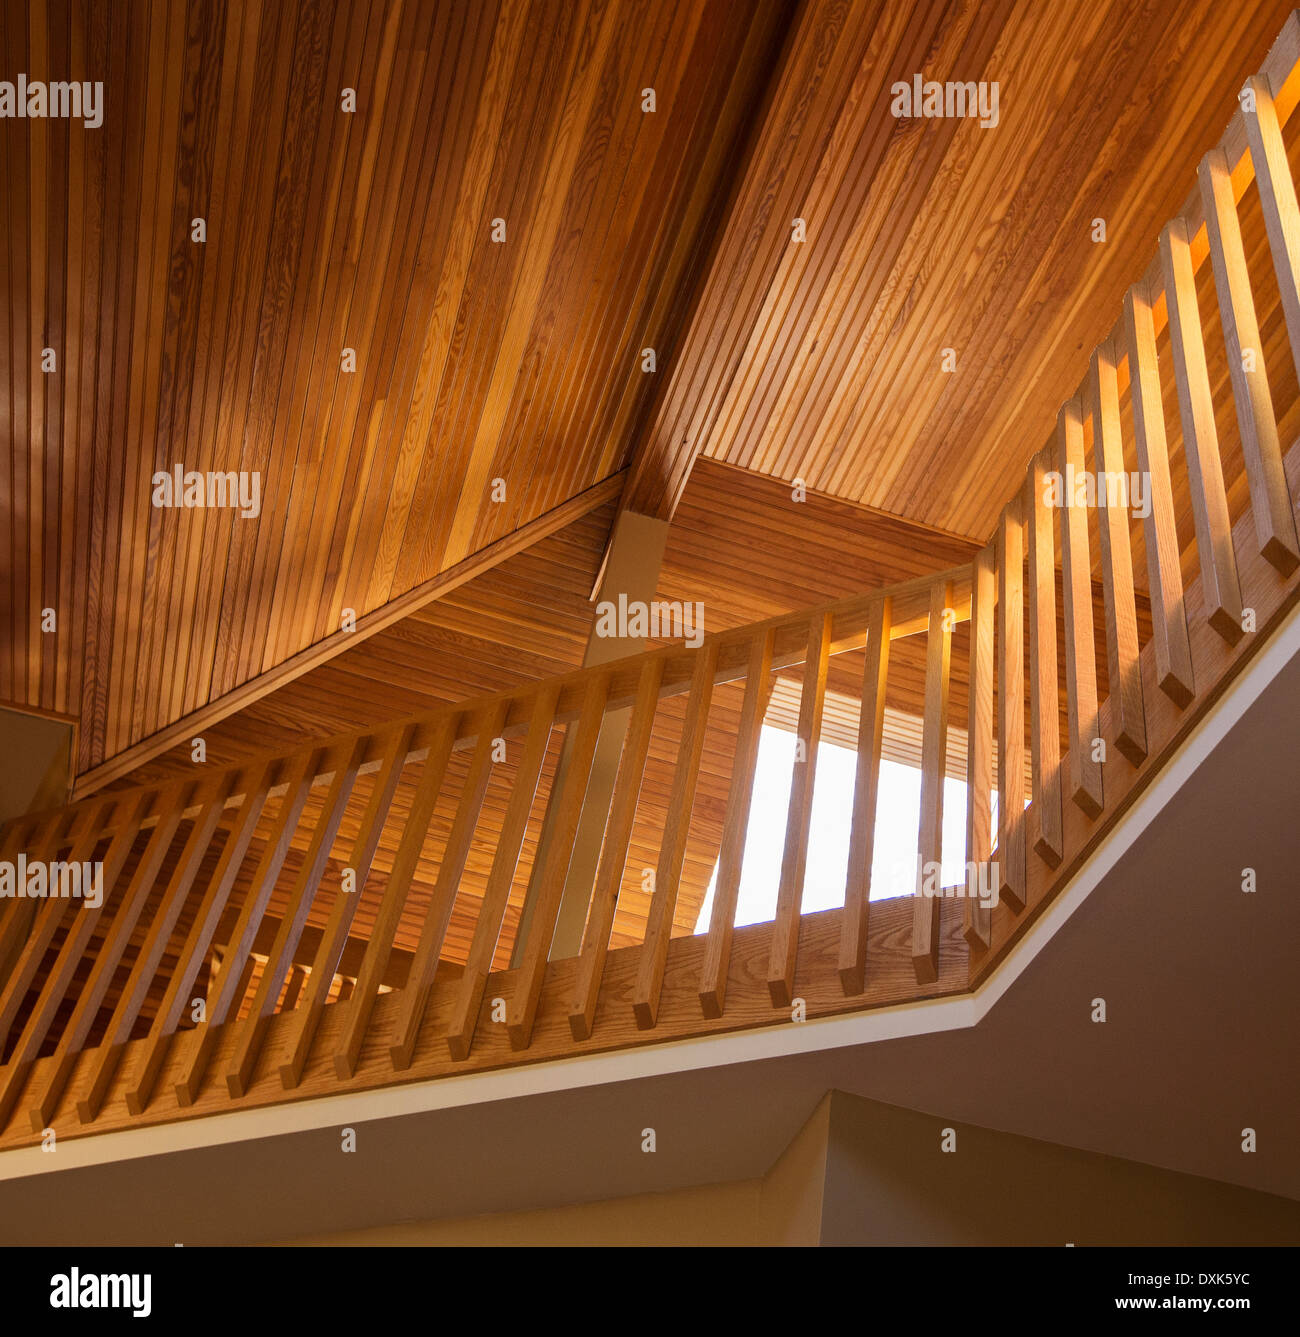 Slanted wooden ceiling above railing in house Stock Photo